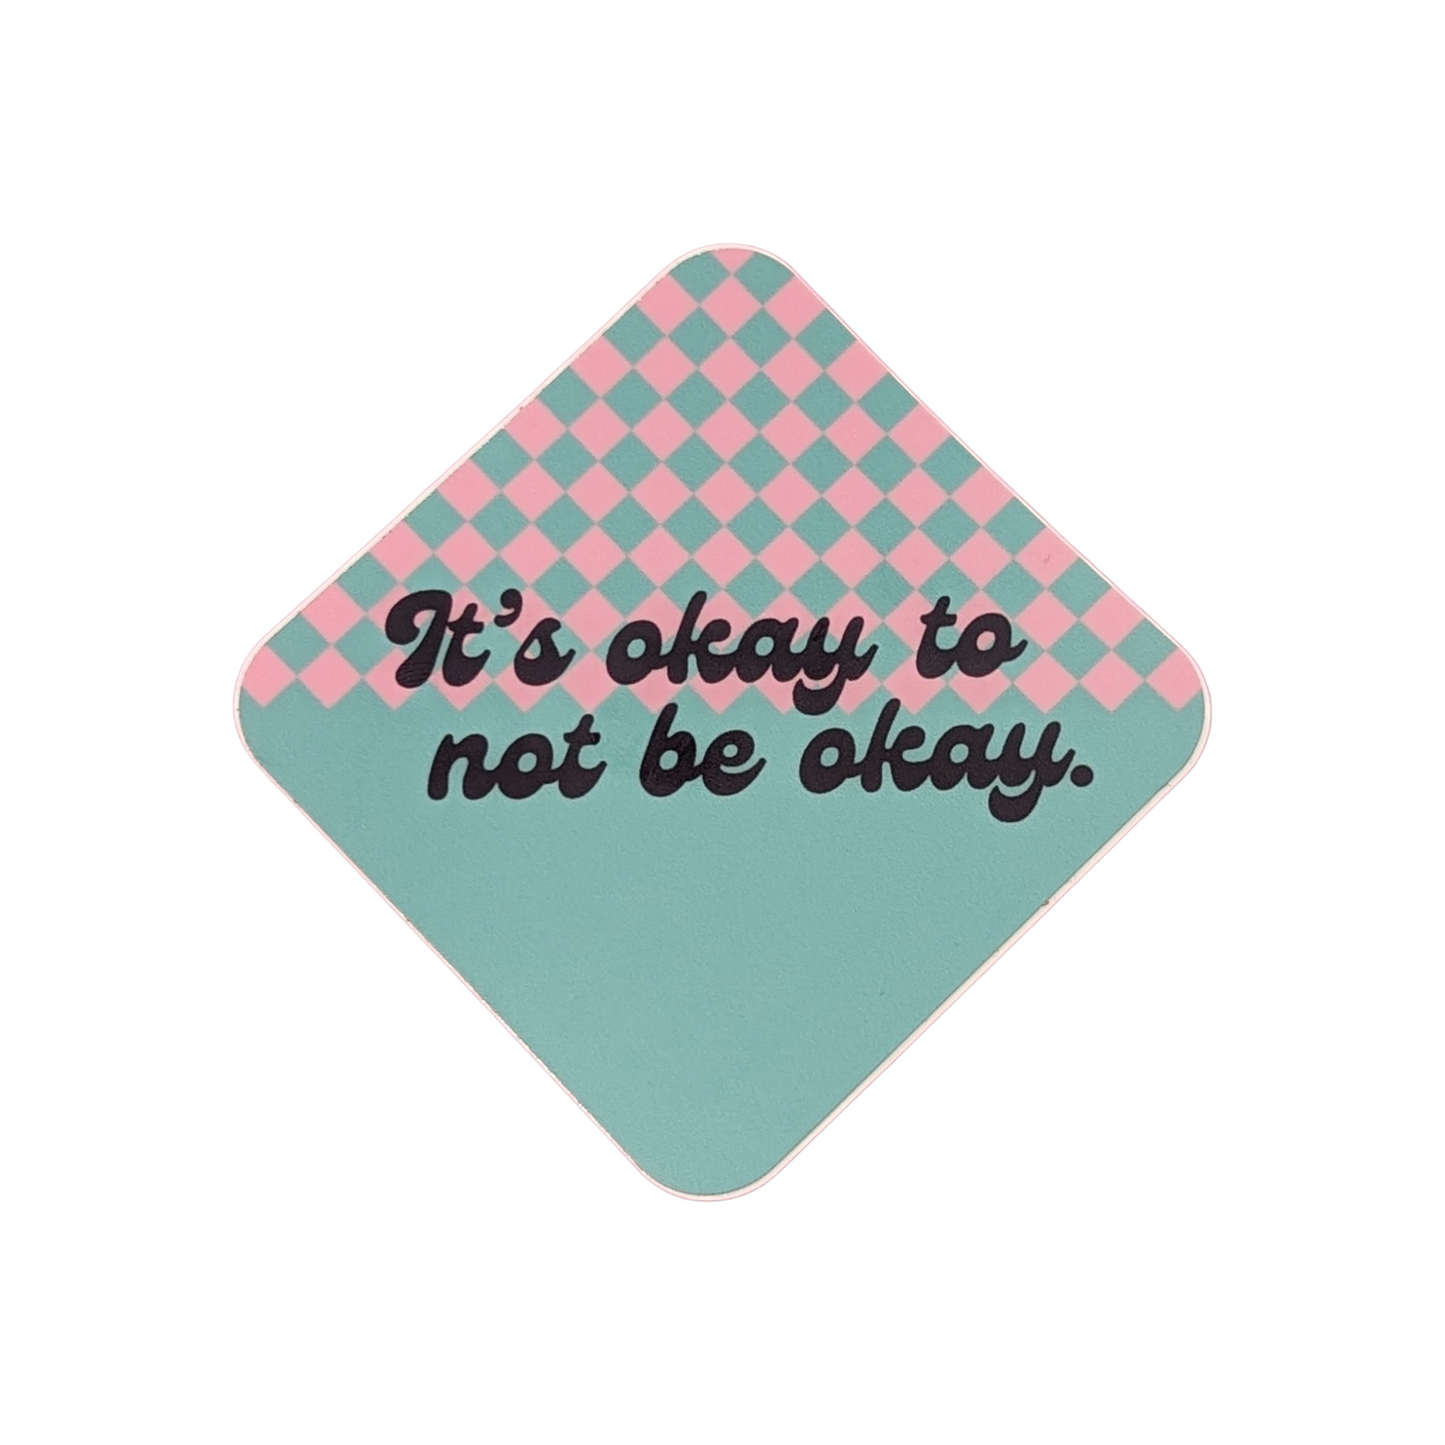 Stickers by manic pixie dream squirrel